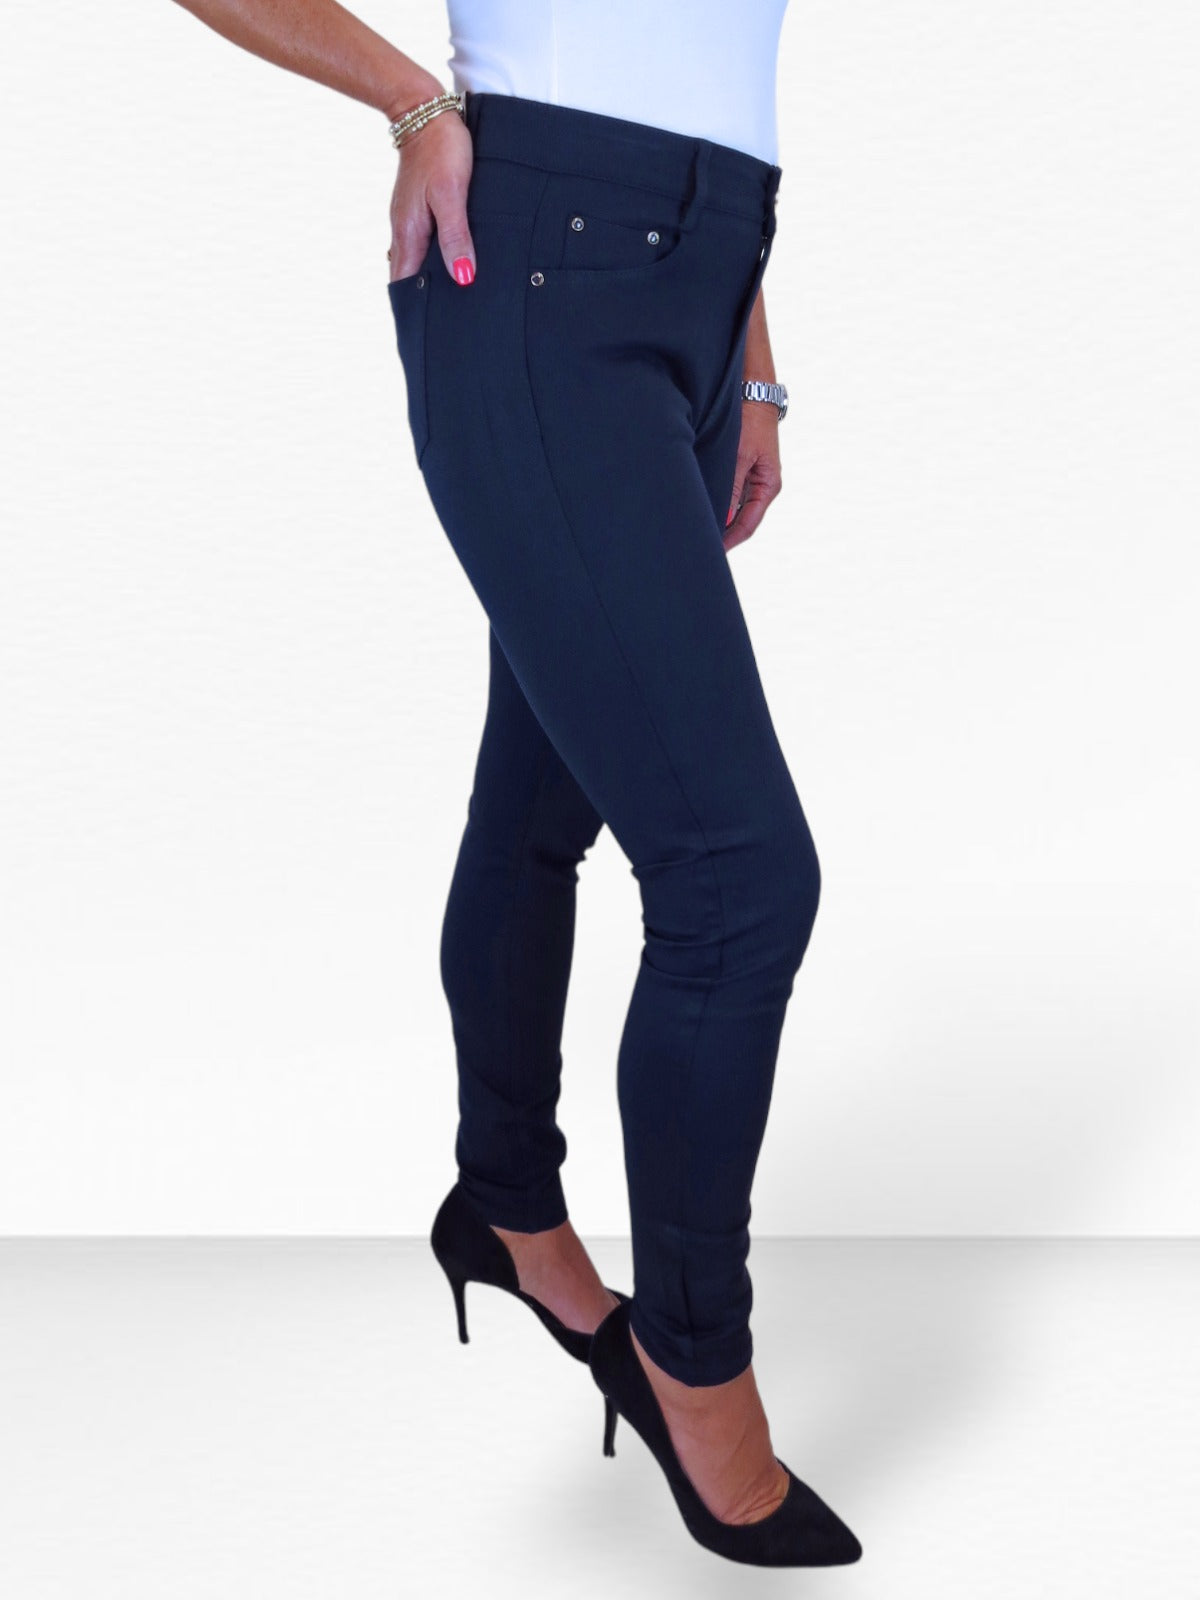 Womens Soft Stretch Ponte Trousers with Pockets Navy Blue